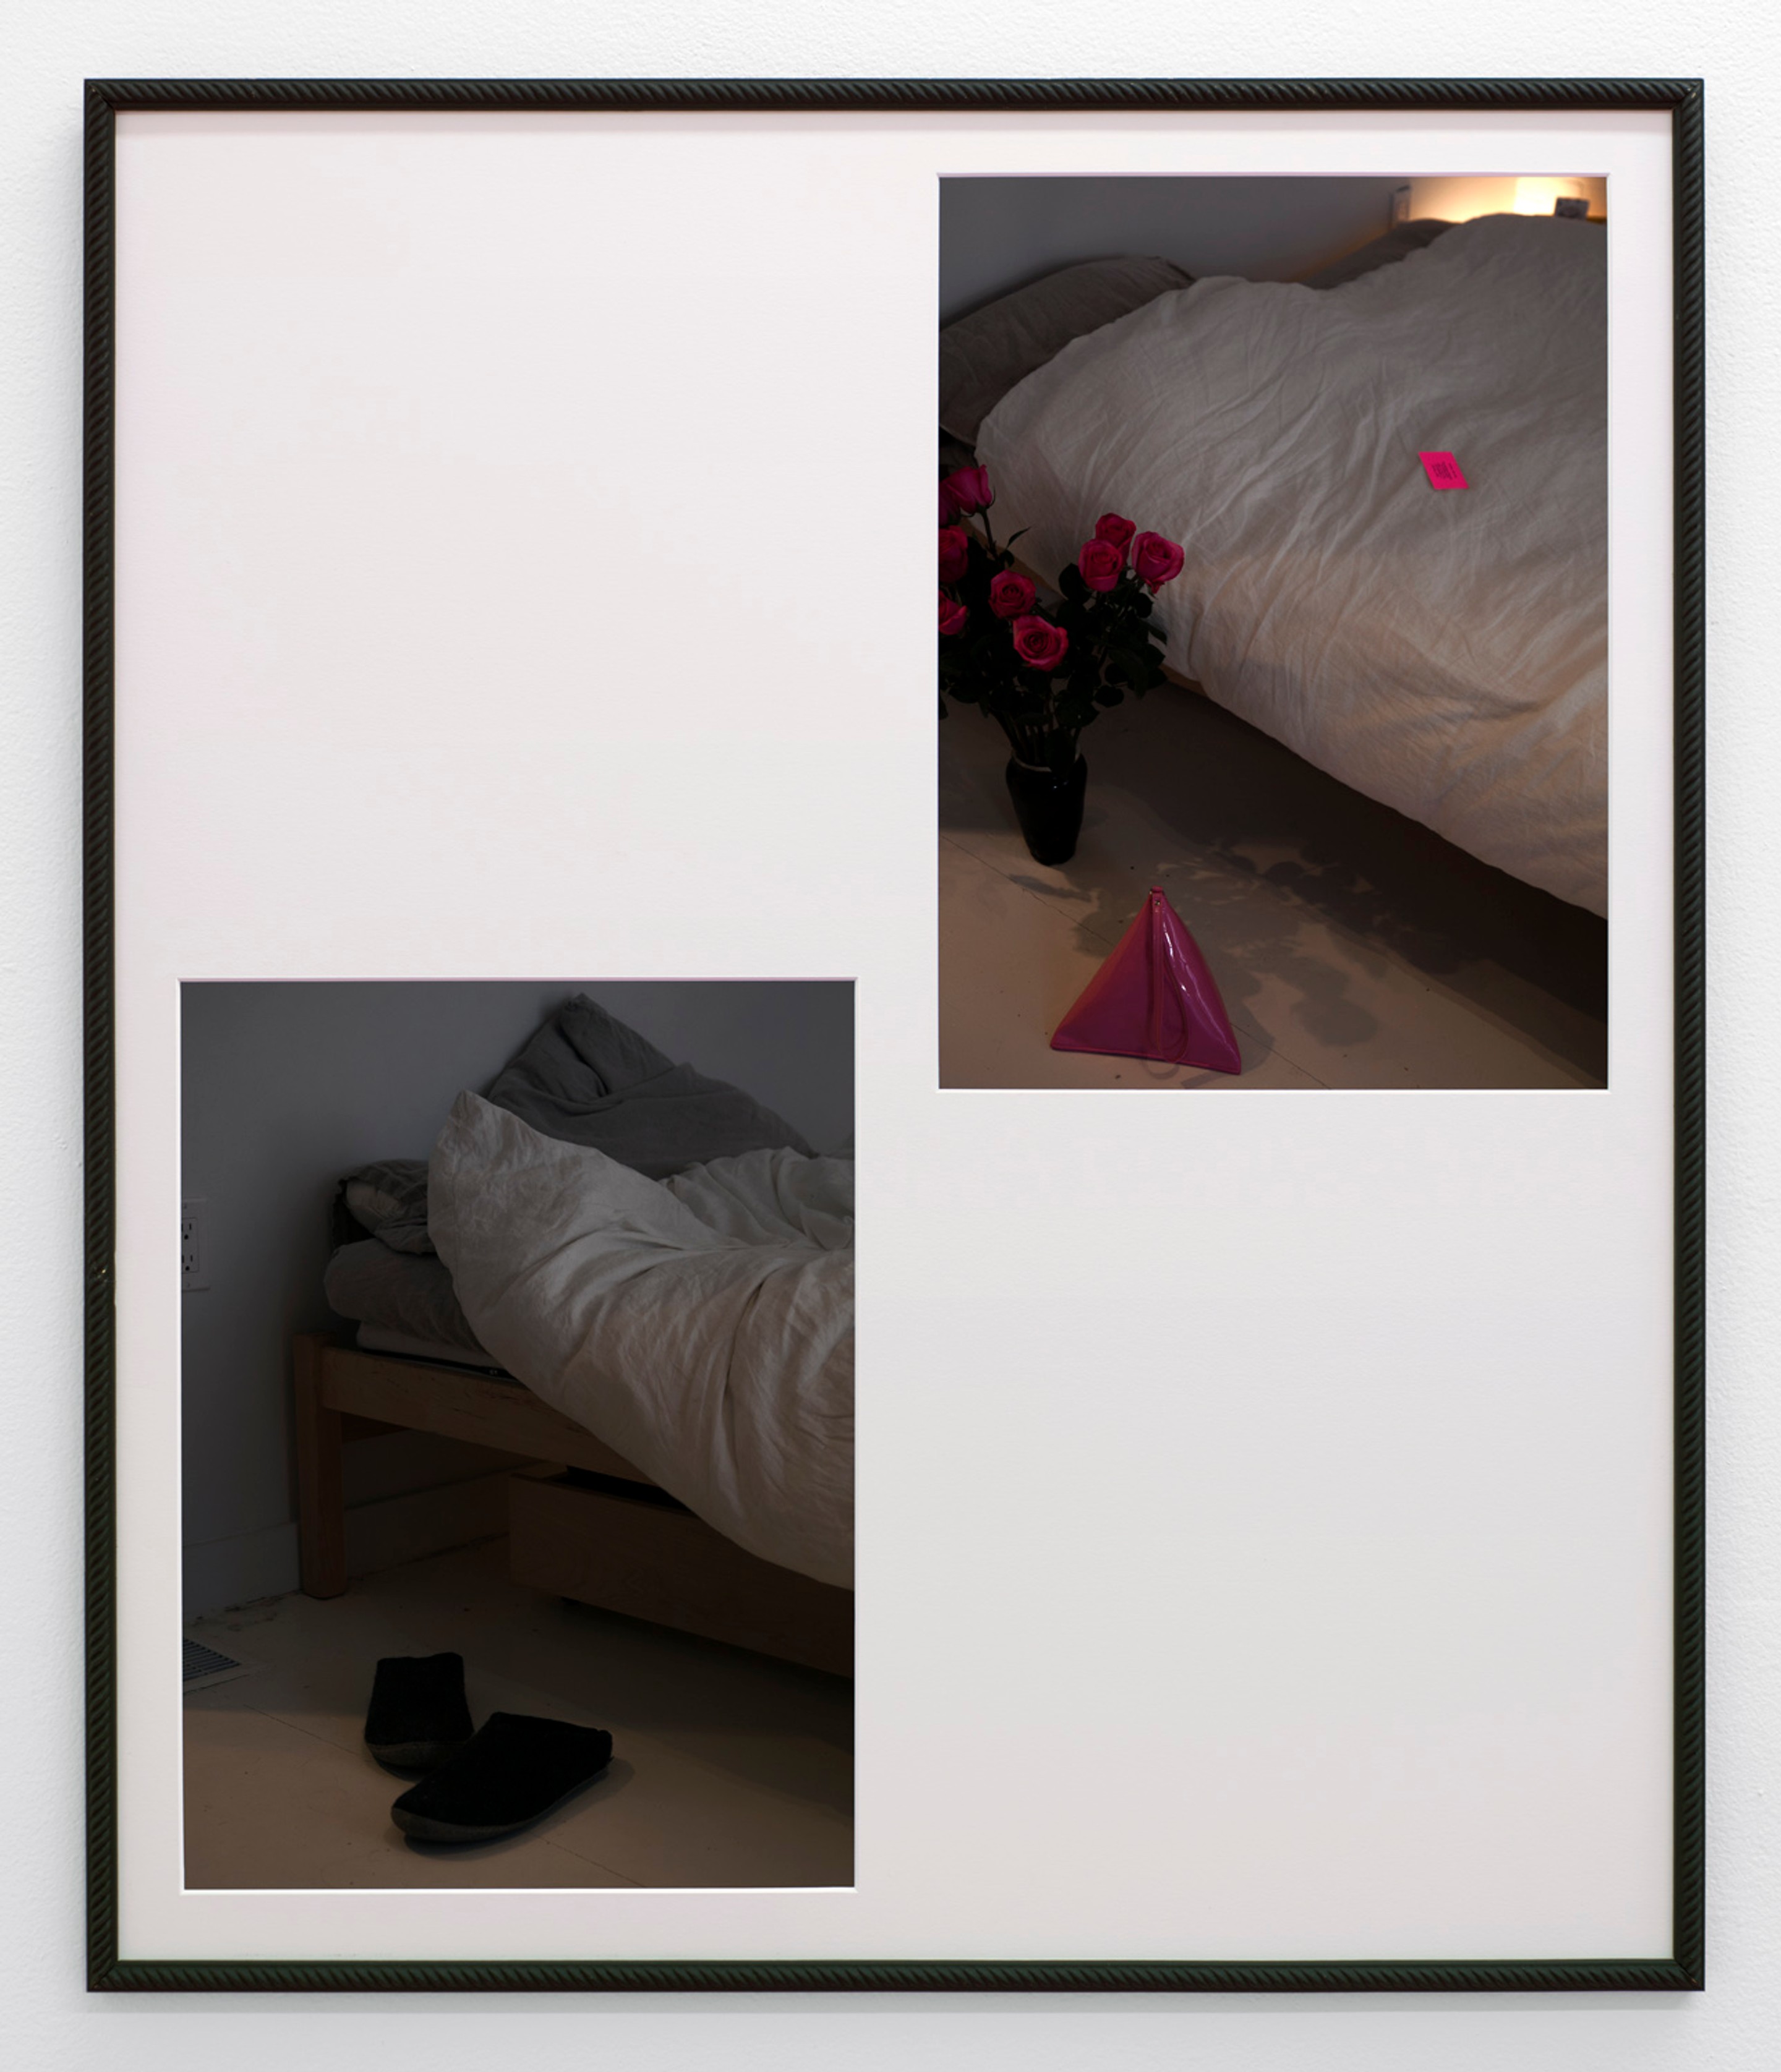 åyr with Stefan Schwartzman

Sam's Bedroom (Pink Roses, Pink Junya Watanabe Triangle Clutch, Queer Thoughts Business Card) (2017)

Archival pigment print, artist's frame. 25.5h x 22.5w inches. Unique